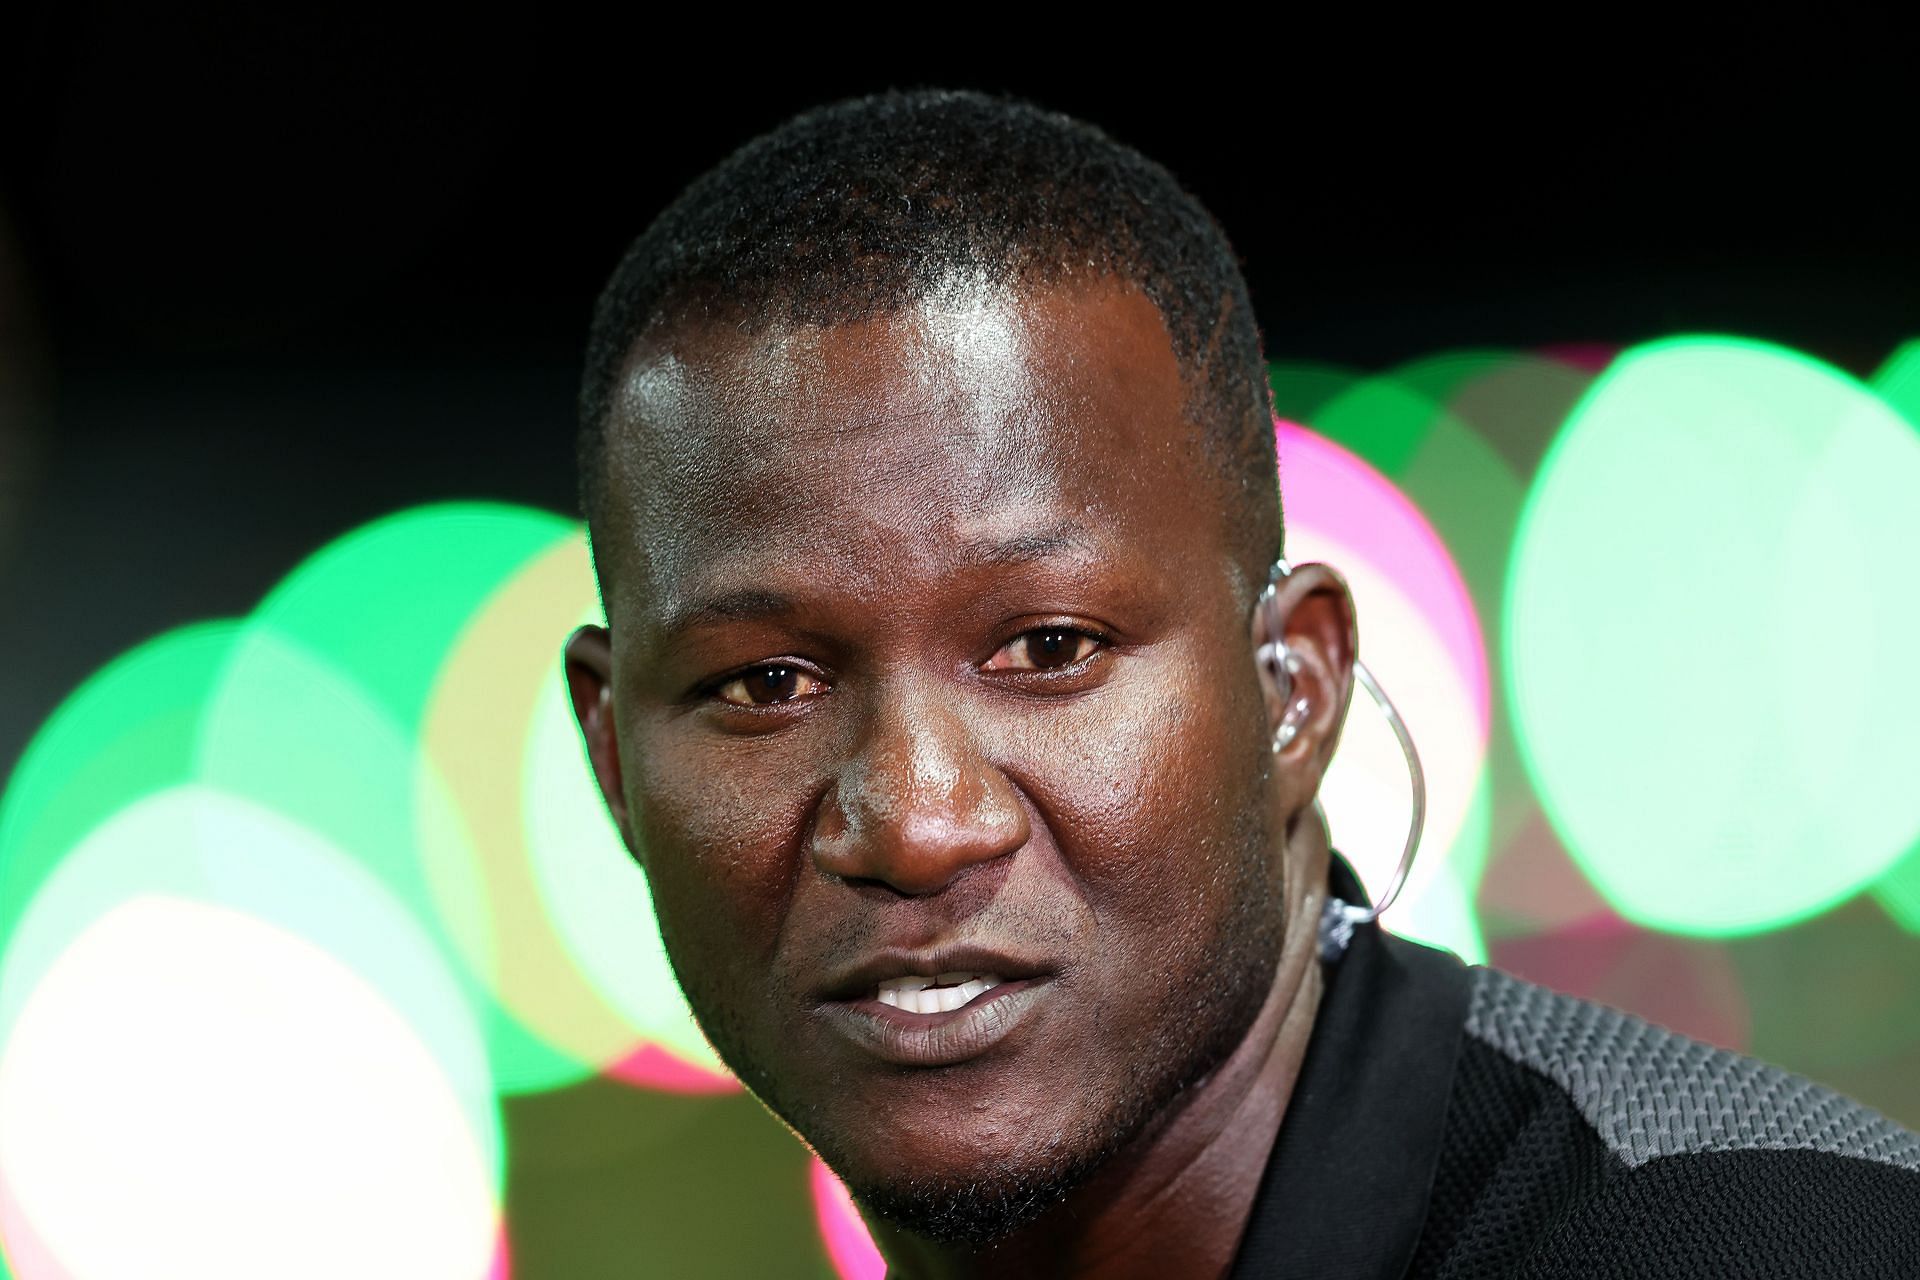 Daren Sammy is one of the greatest West Indian all-rounders of all time